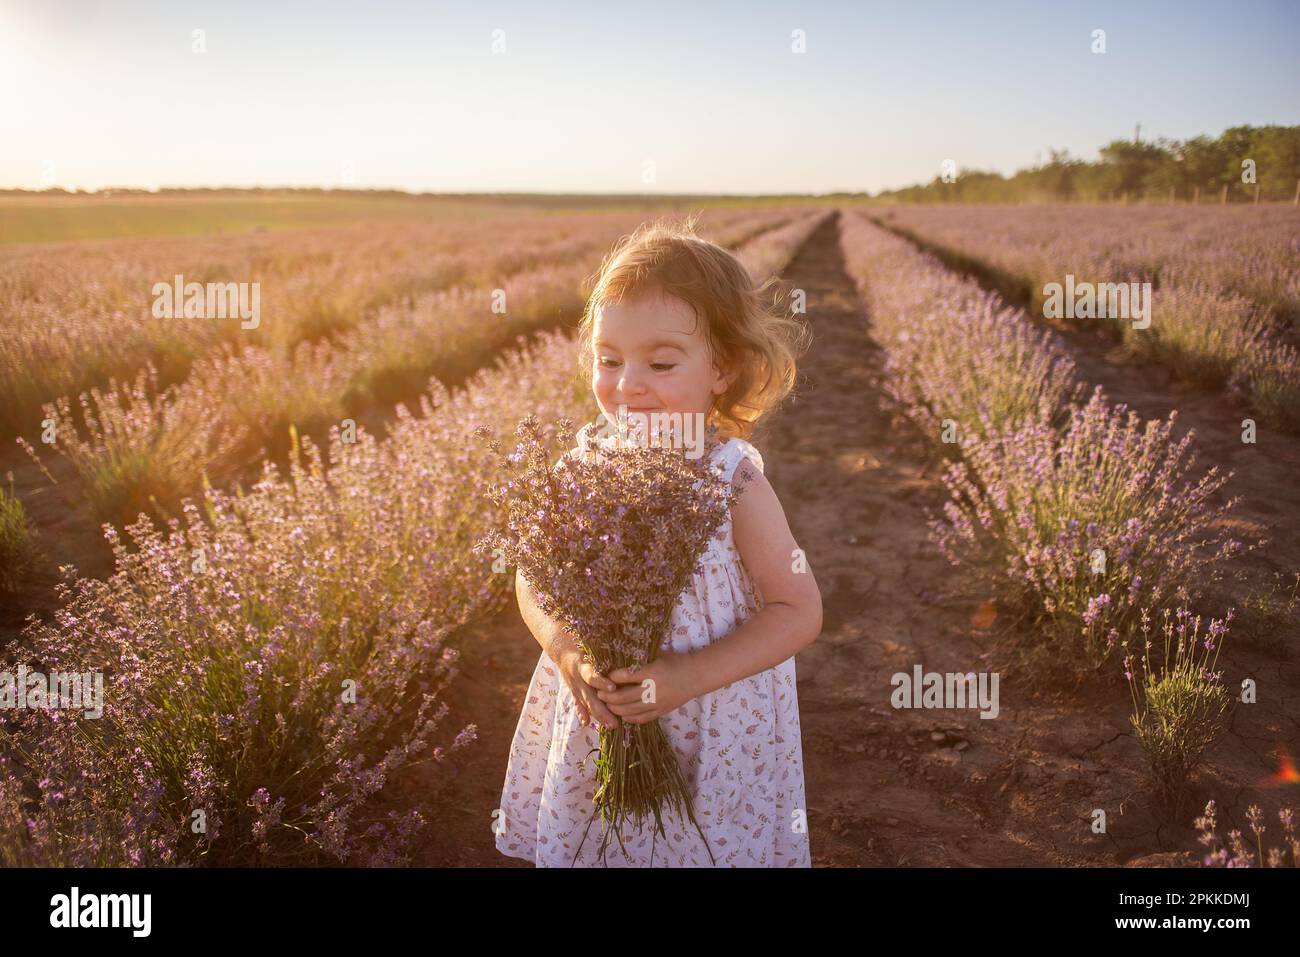 Close-up portrait of little girl in flower dress holding bouquet with purple lavender at sunset. Child stands among the rows in field. Walk in country Stock Photo